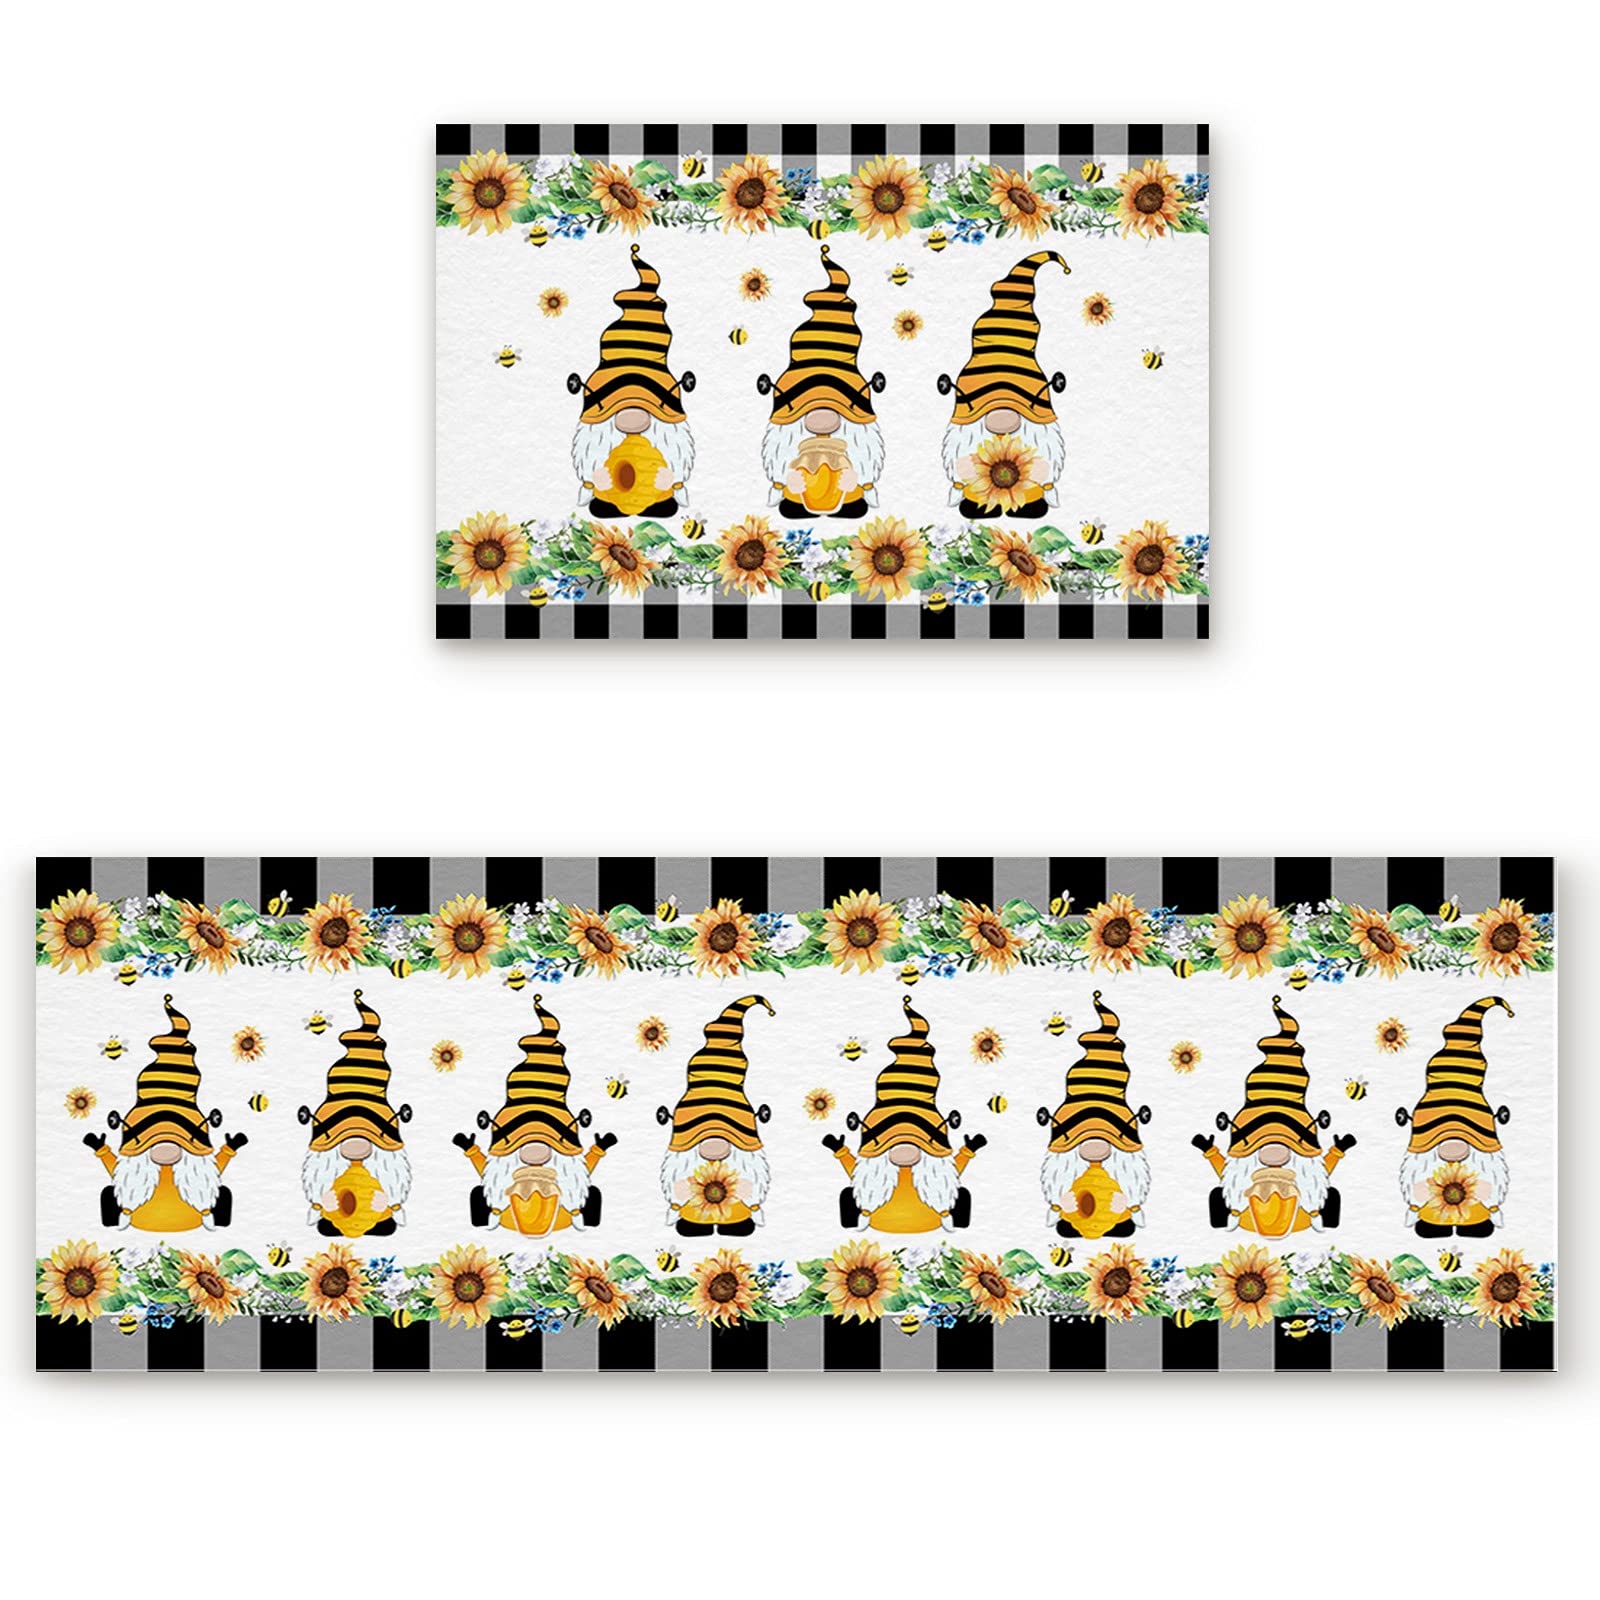 Kitchen Rugs and Mats Farm Bee Gnomes with Honey Sunflower Non Slip Carpets Doormat 2 Piece Runner Rug Set for Kitchen Sink Floor Country Floral Lace Buffalo Plaid Edge